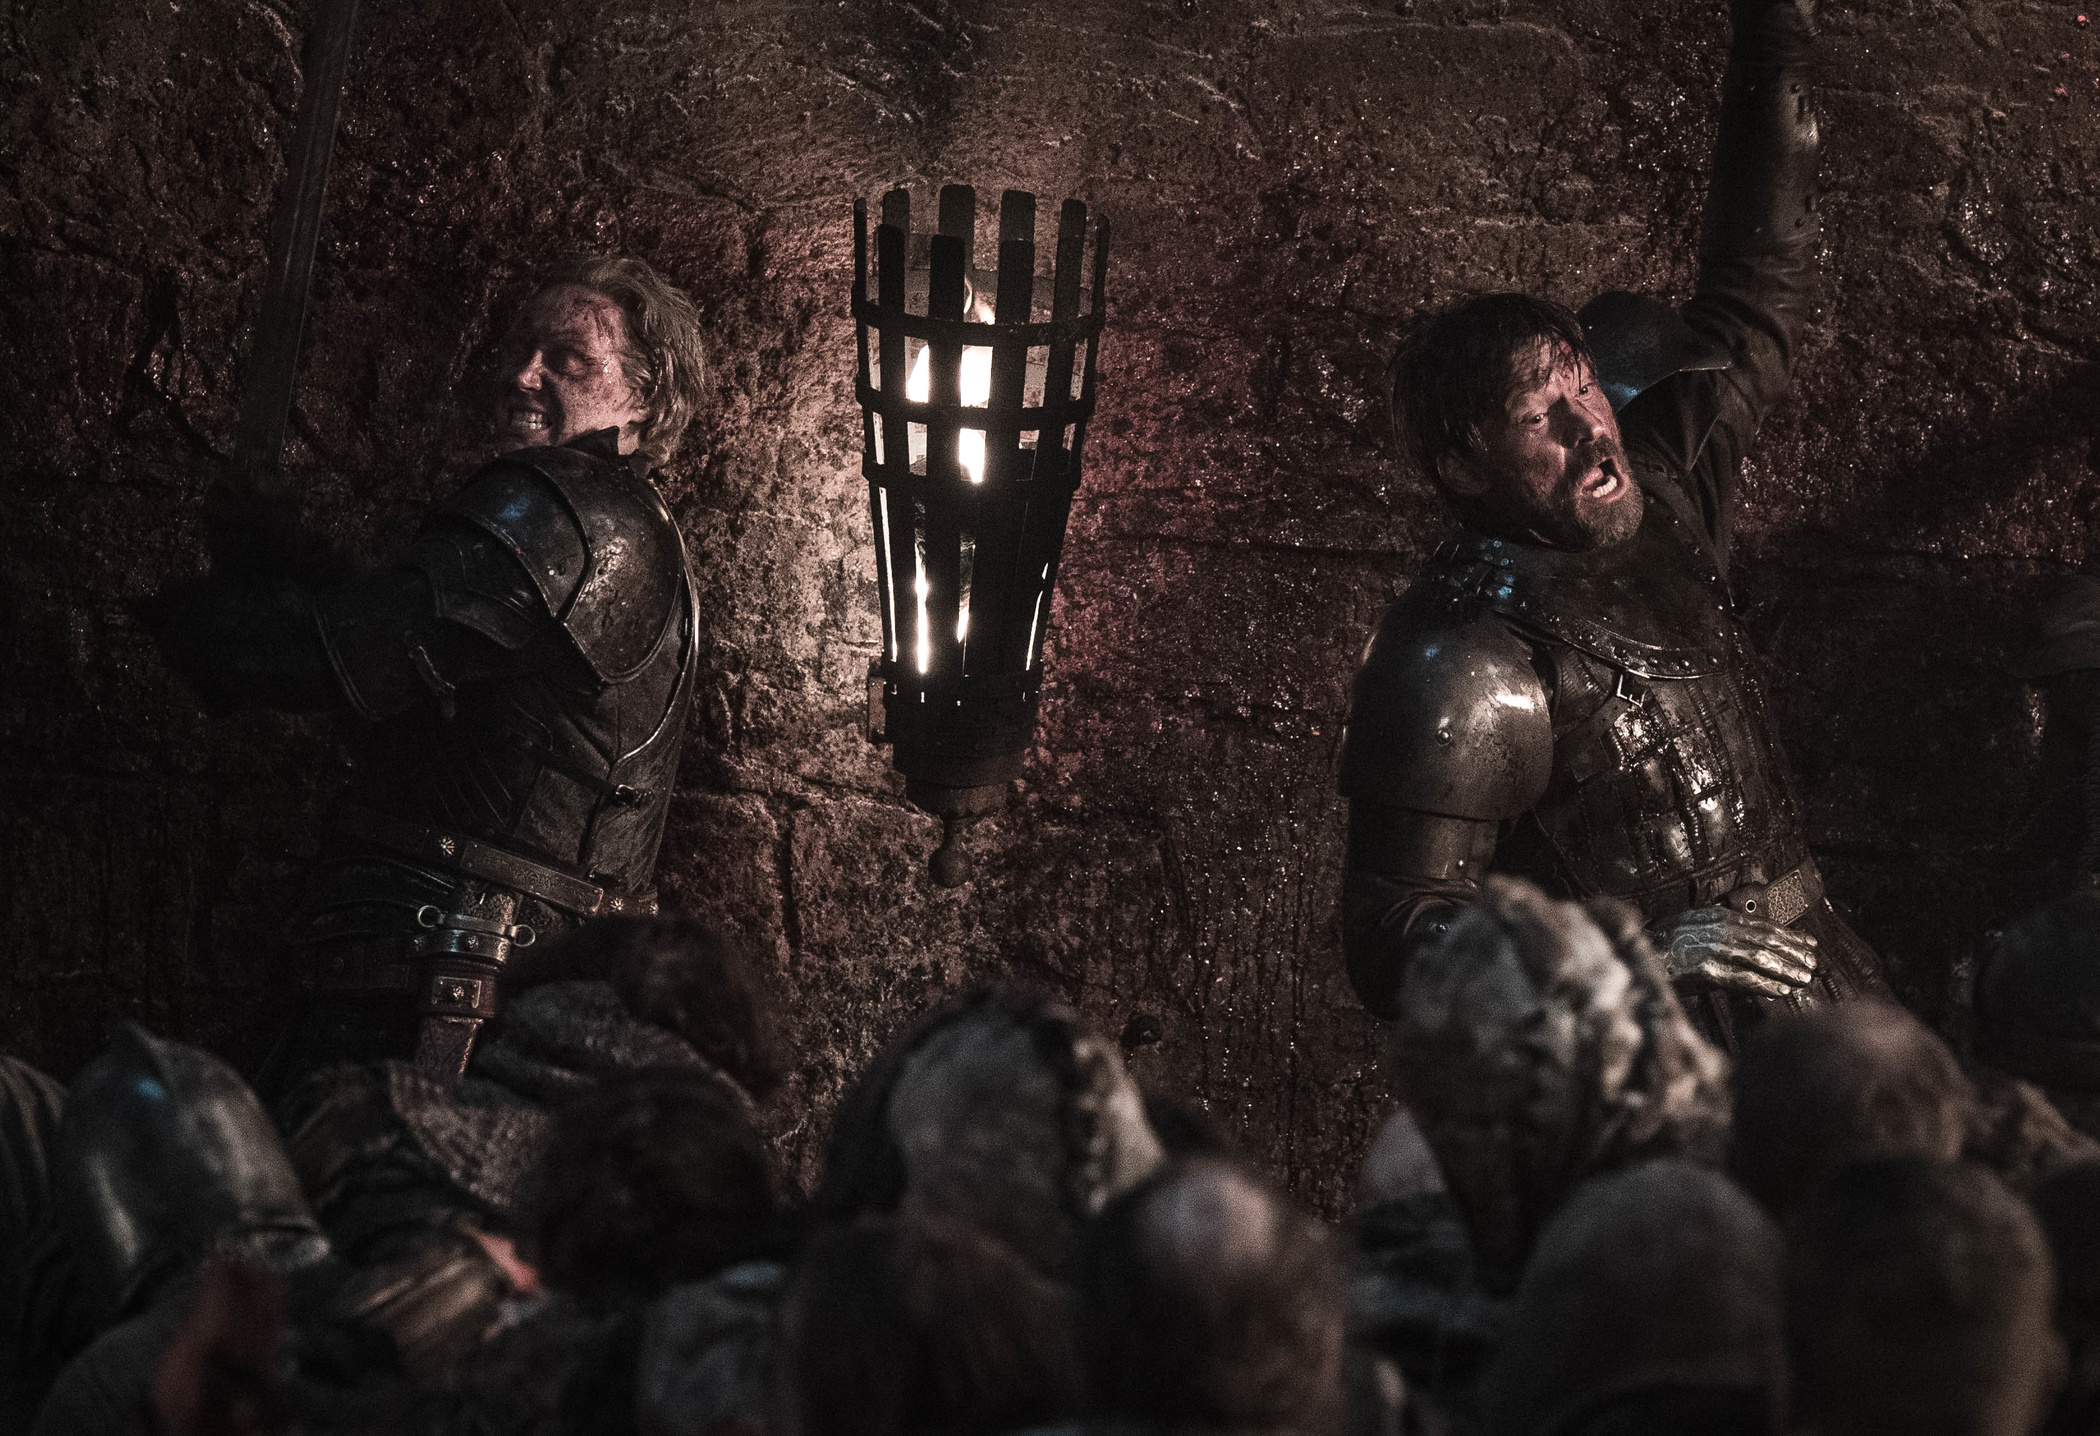 Brienne of Tarth and Jaime Lannister during battle in Game of Thrones.